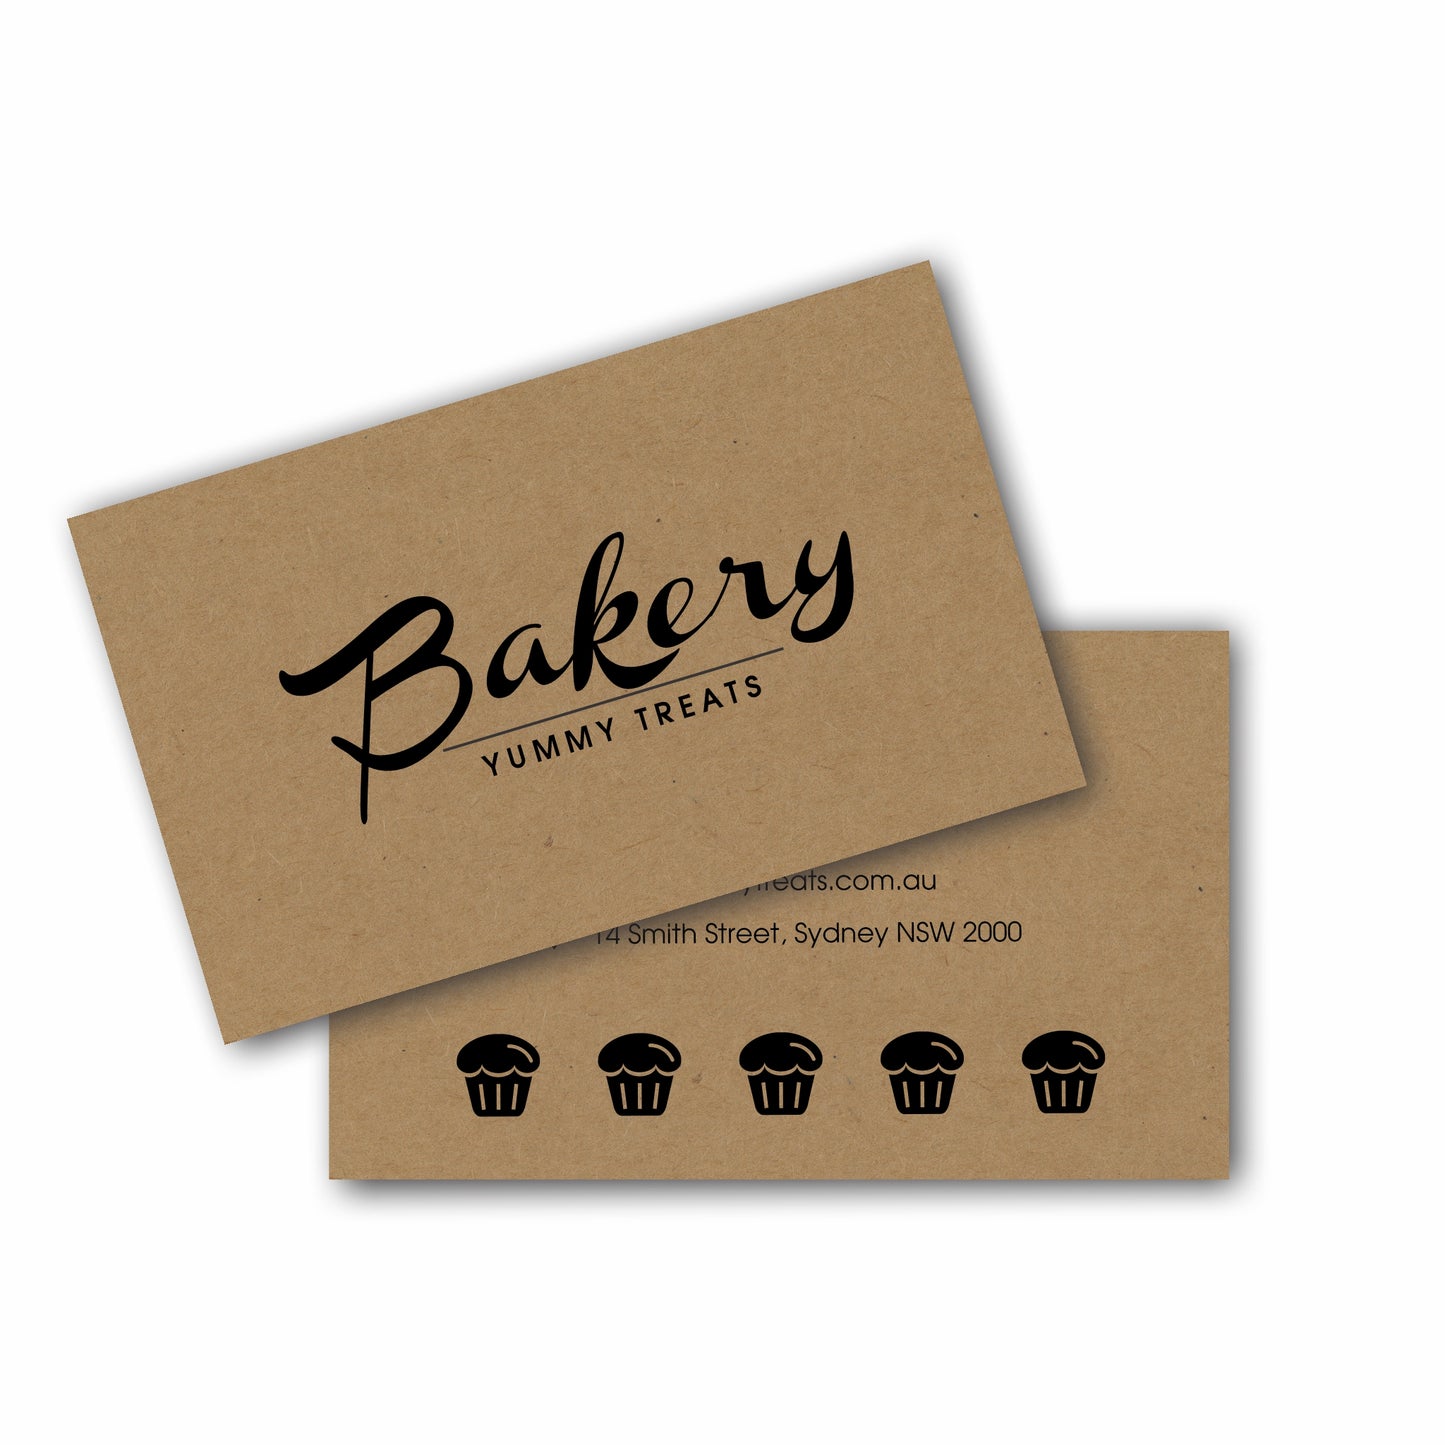 Kraft brown business cards, textured brown card with black ink